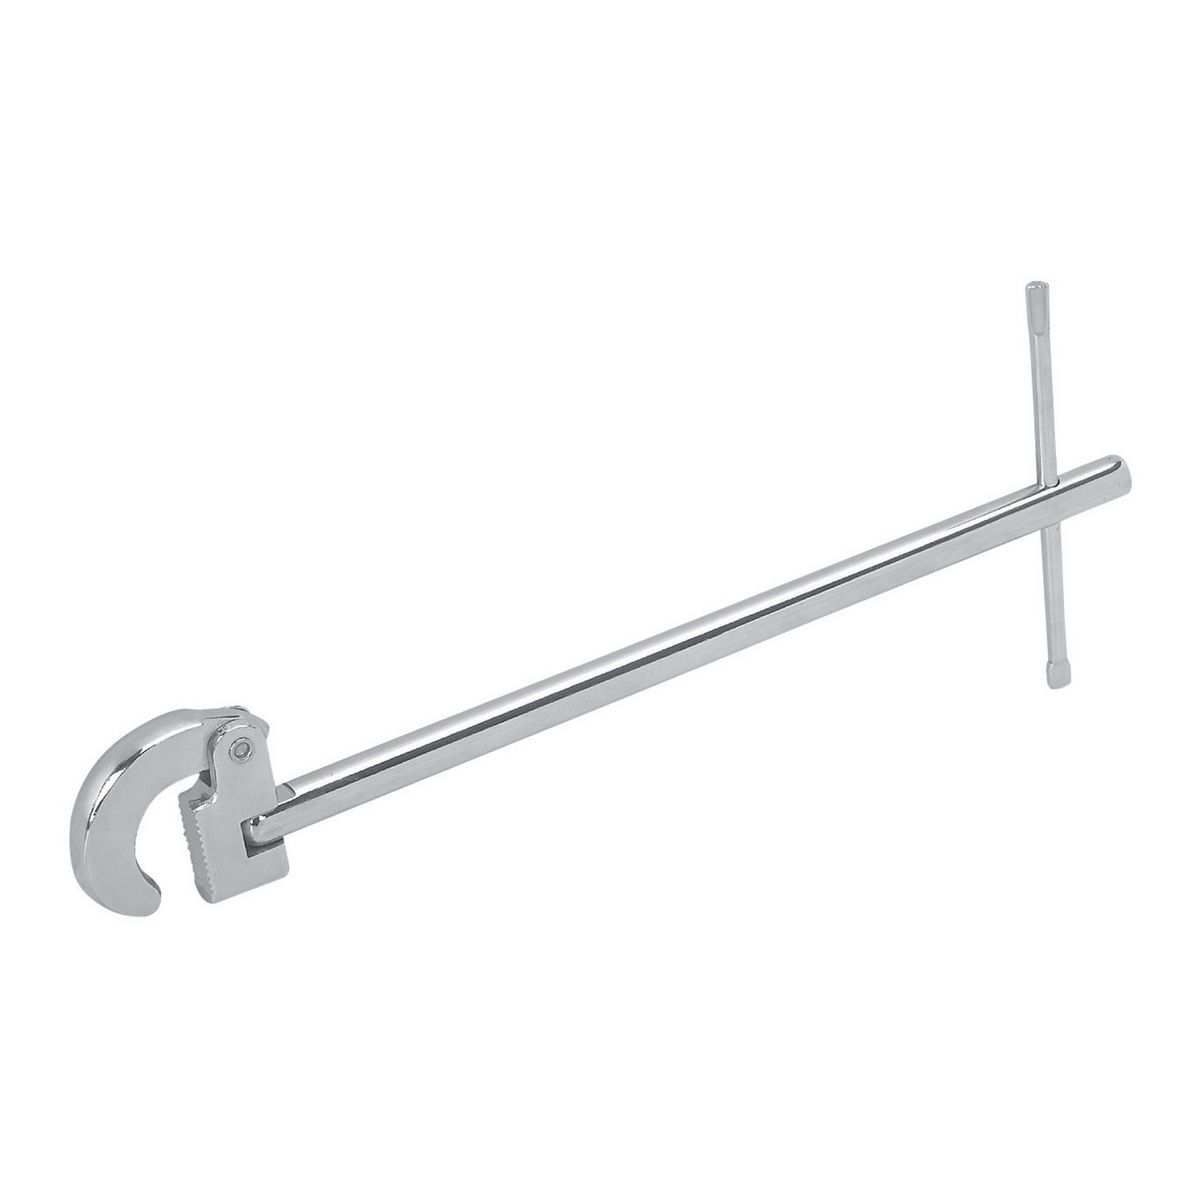 Featured image for “Basin Wrench”